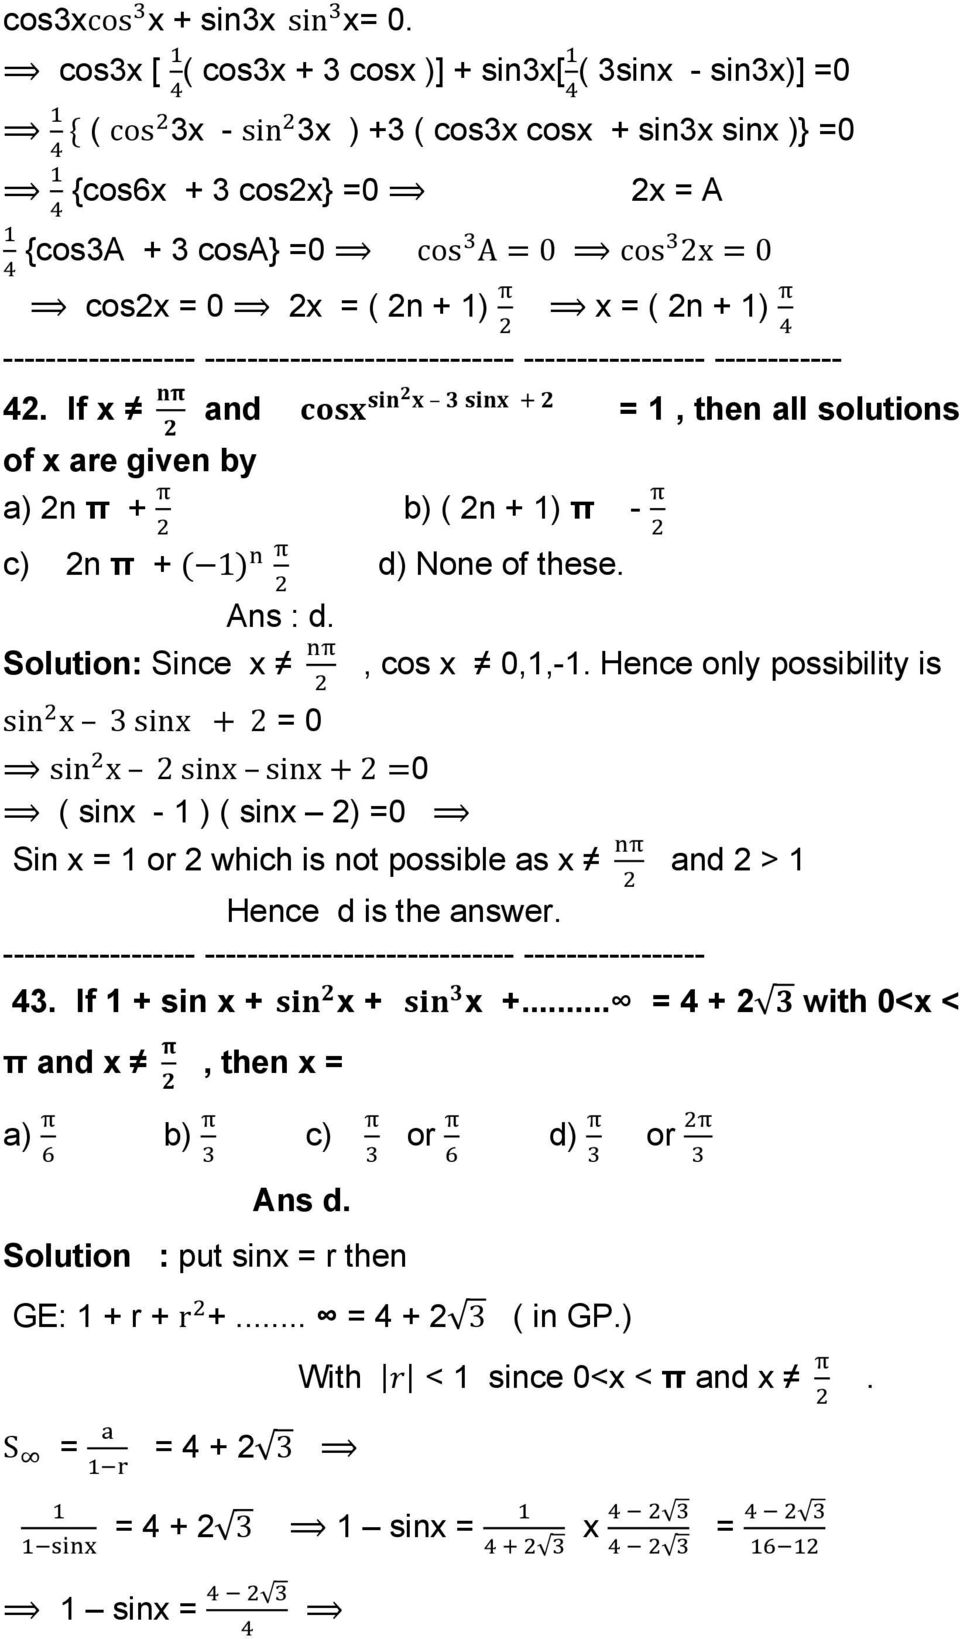 1) x = ( 2n + 1) 42. If x and = 1, then all solutions of x are given by a) 2n π + b) ( 2n + 1) π - c) 2n π + 1 d) None of these. Ans : d. Solution: Since x, cos x 0,1,-1.